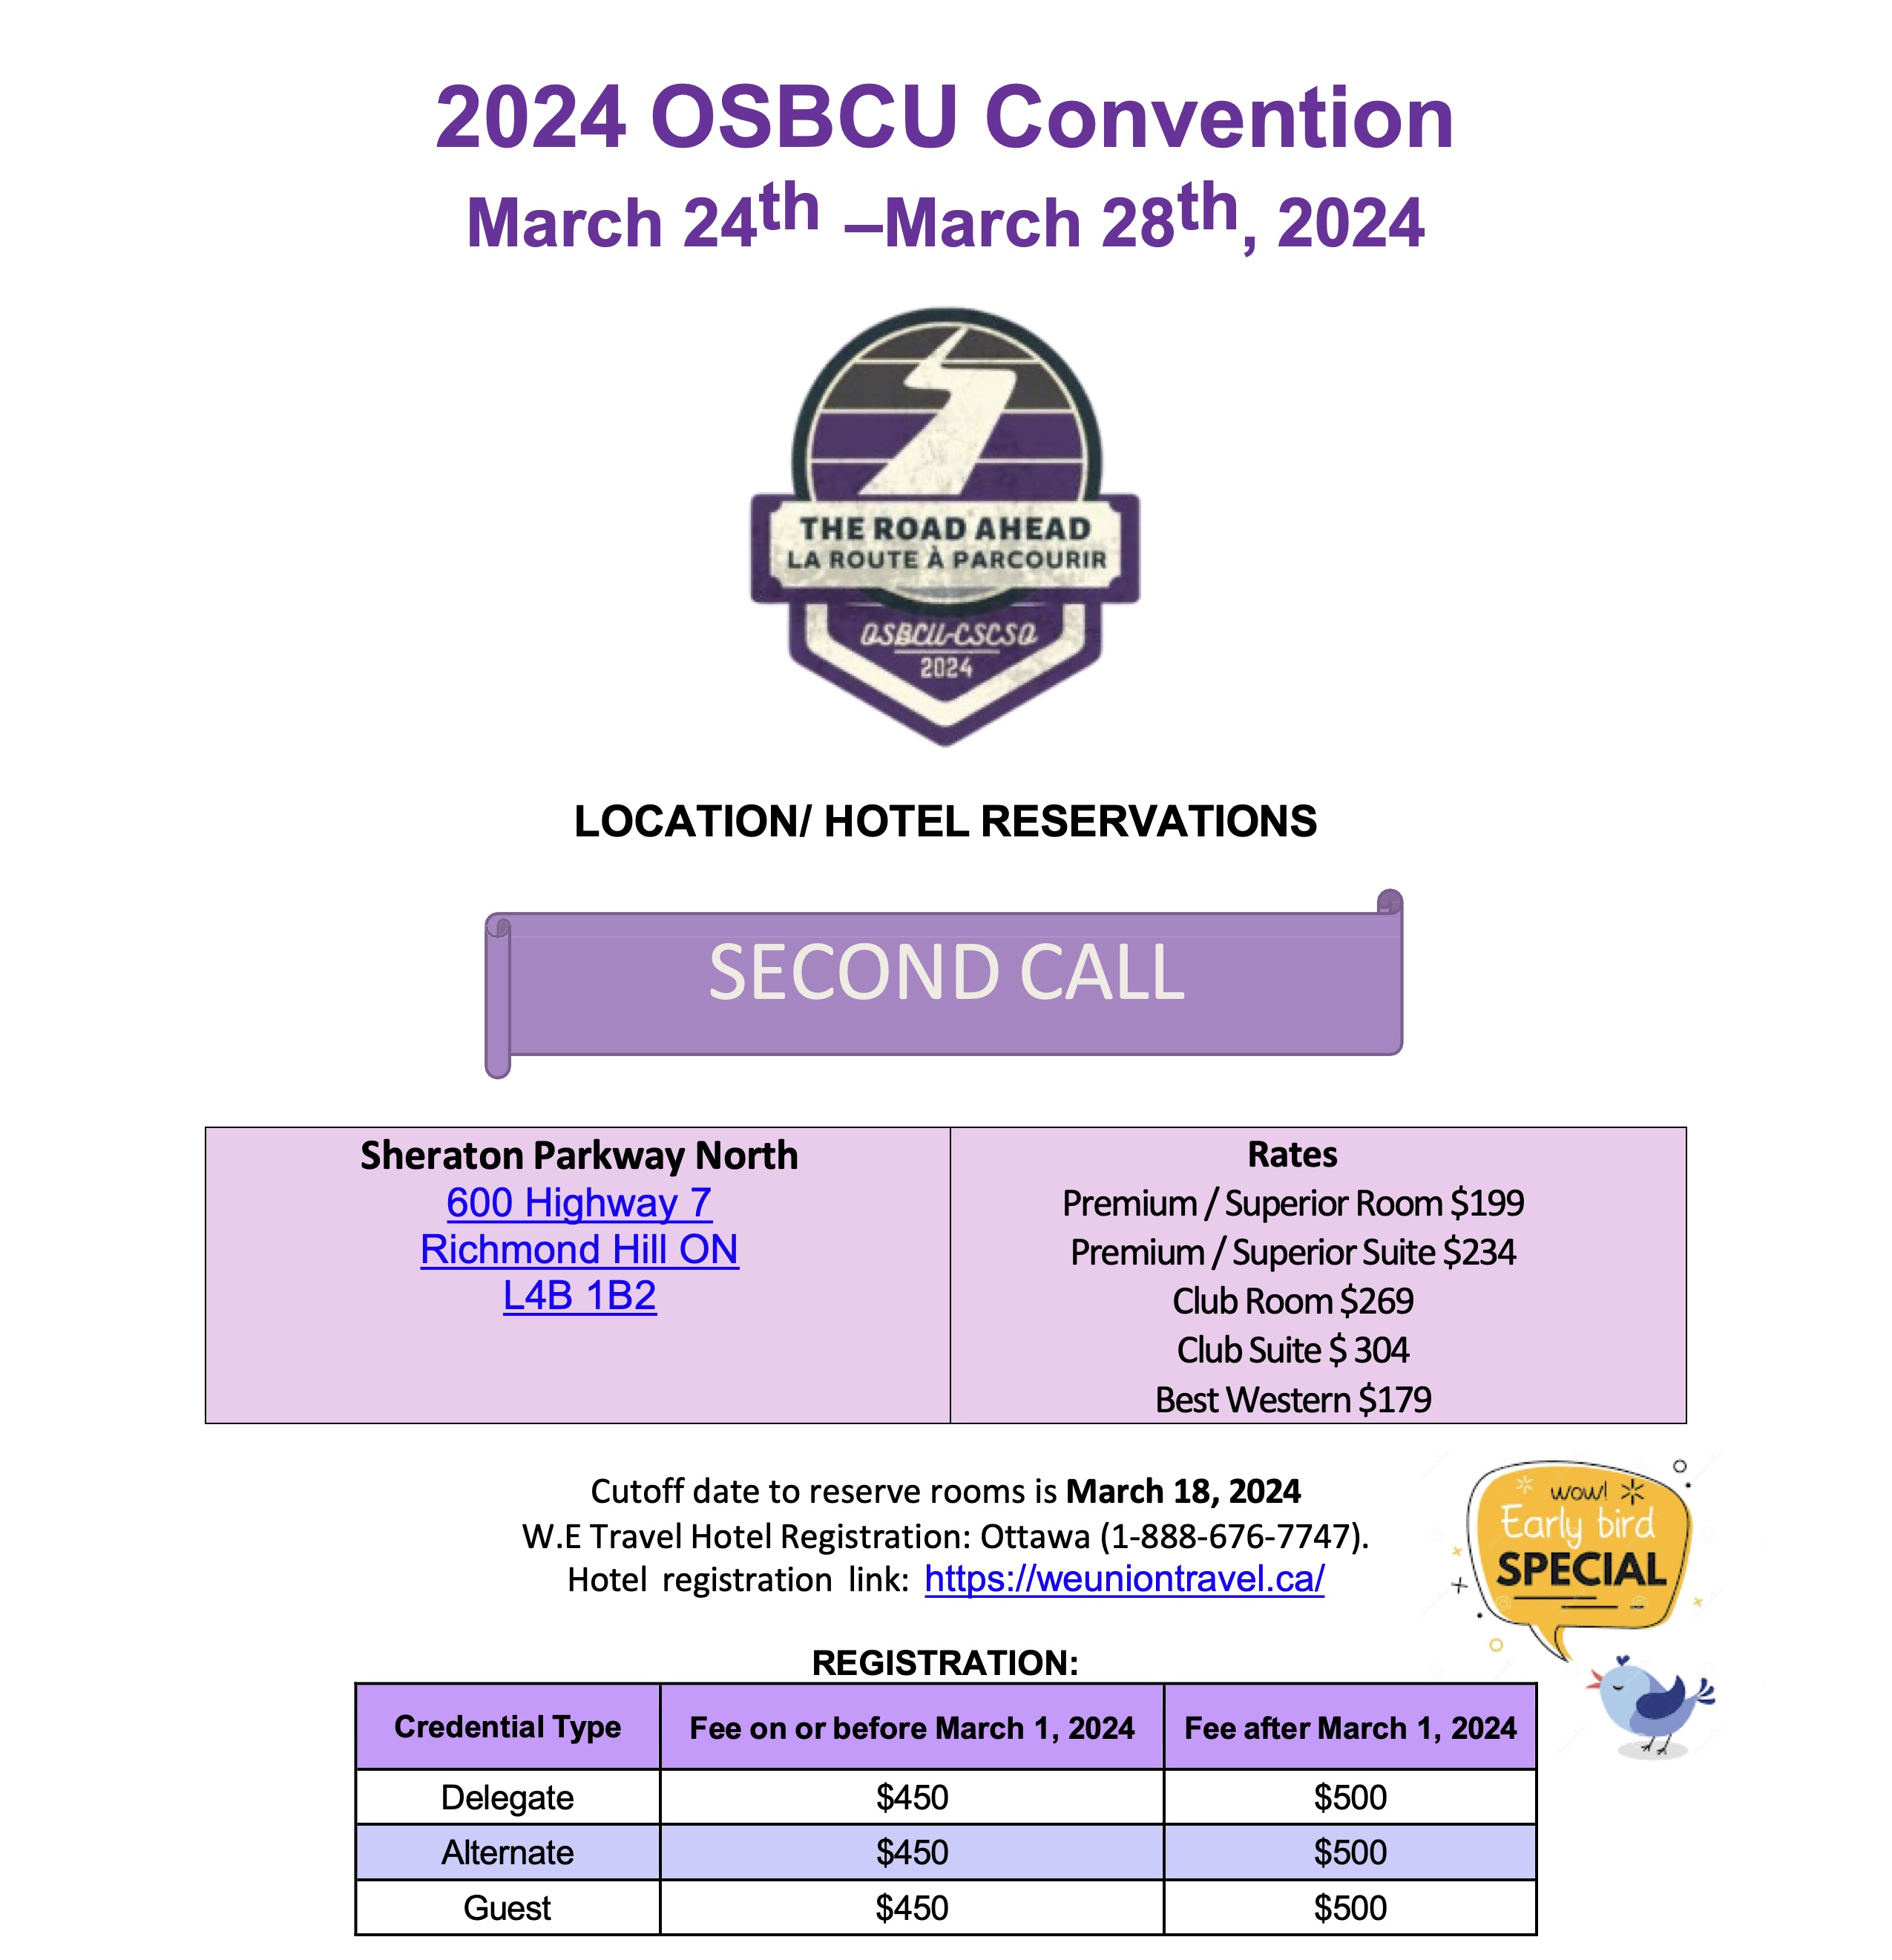 Second Call - 2024 OSBCU Convention March 24th - March 28th, 2024